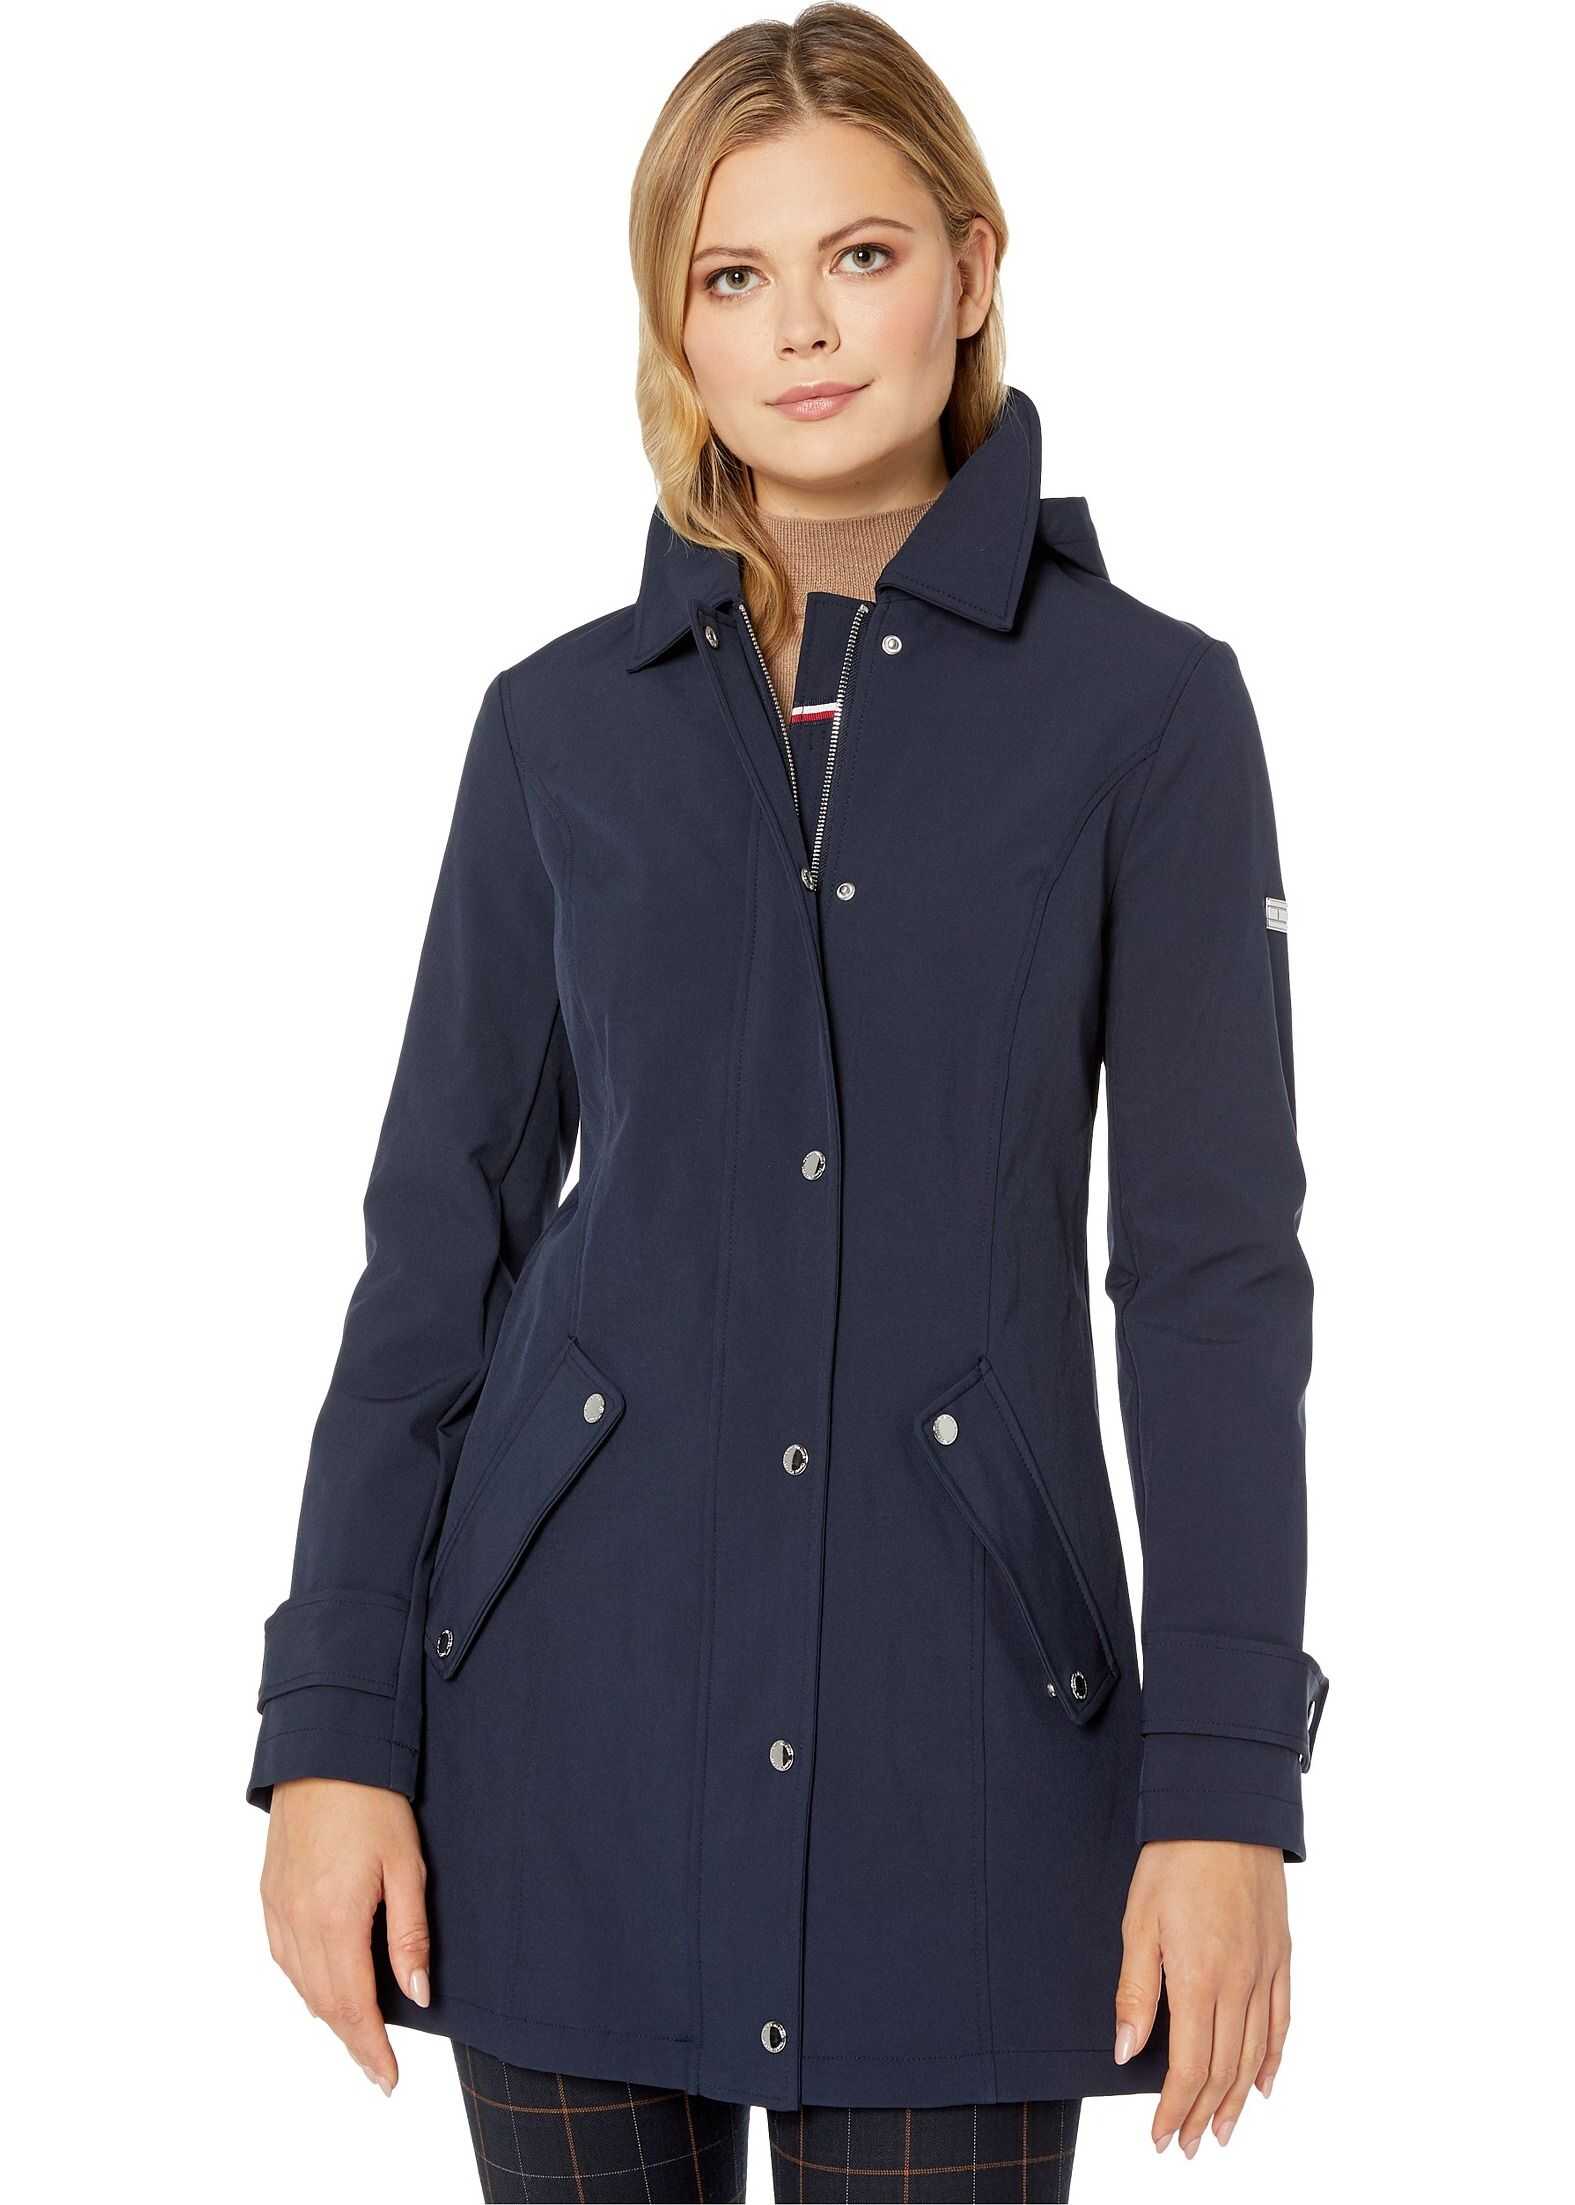 Tommy Hilfiger 33" Lady Like Softshell Button Placket Navy